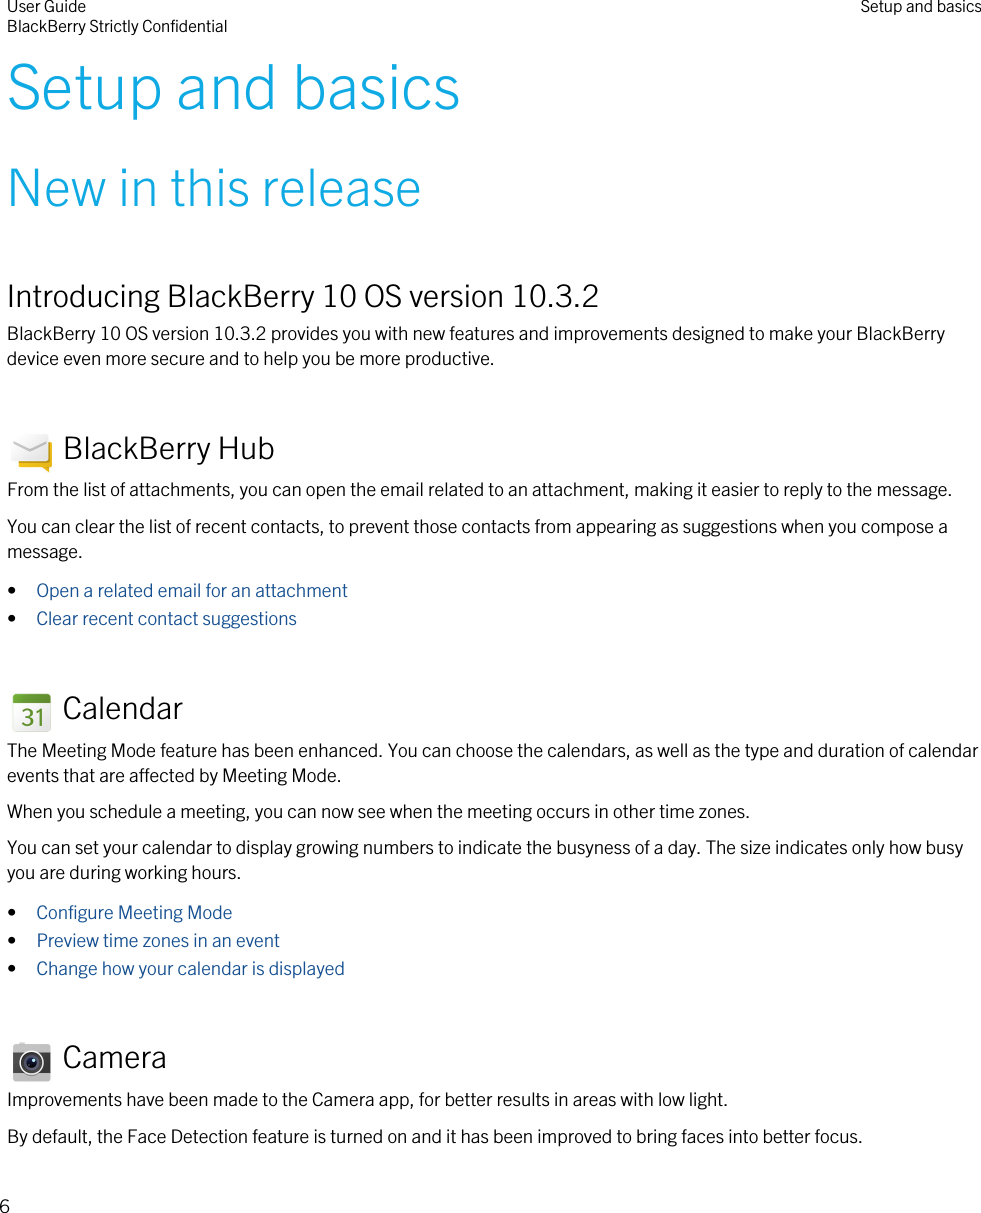 Setup and basicsNew in this releaseIntroducing BlackBerry 10 OS version 10.3.2BlackBerry 10 OS version 10.3.2 provides you with new features and improvements designed to make your BlackBerry device even more secure and to help you be more productive. BlackBerry HubFrom the list of attachments, you can open the email related to an attachment, making it easier to reply to the message.You can clear the list of recent contacts, to prevent those contacts from appearing as suggestions when you compose a message.•Open a related email for an attachment•Clear recent contact suggestions CalendarThe Meeting Mode feature has been enhanced. You can choose the calendars, as well as the type and duration of calendar events that are affected by Meeting Mode.When you schedule a meeting, you can now see when the meeting occurs in other time zones.You can set your calendar to display growing numbers to indicate the busyness of a day. The size indicates only how busy you are during working hours.•Configure Meeting Mode•Preview time zones in an event•Change how your calendar is displayed CameraImprovements have been made to the Camera app, for better results in areas with low light.By default, the Face Detection feature is turned on and it has been improved to bring faces into better focus.User GuideBlackBerry Strictly Confidential Setup and basics6